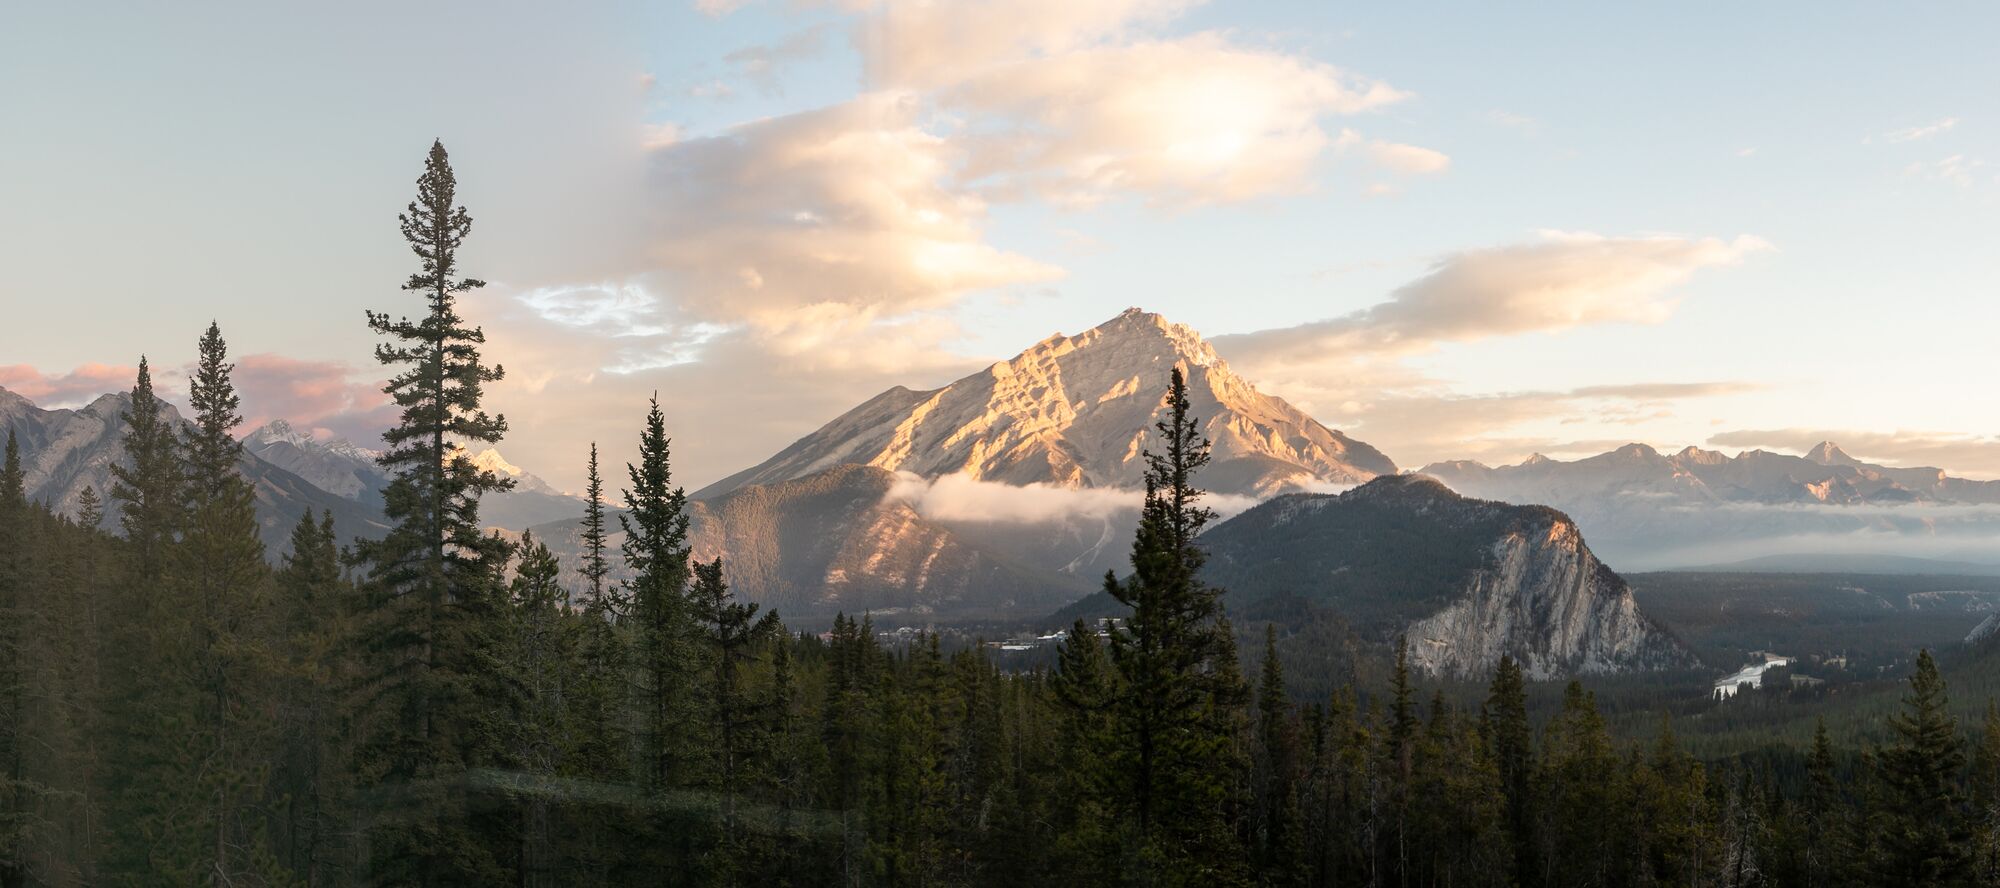 An image of a mountain range in Banff National Park.